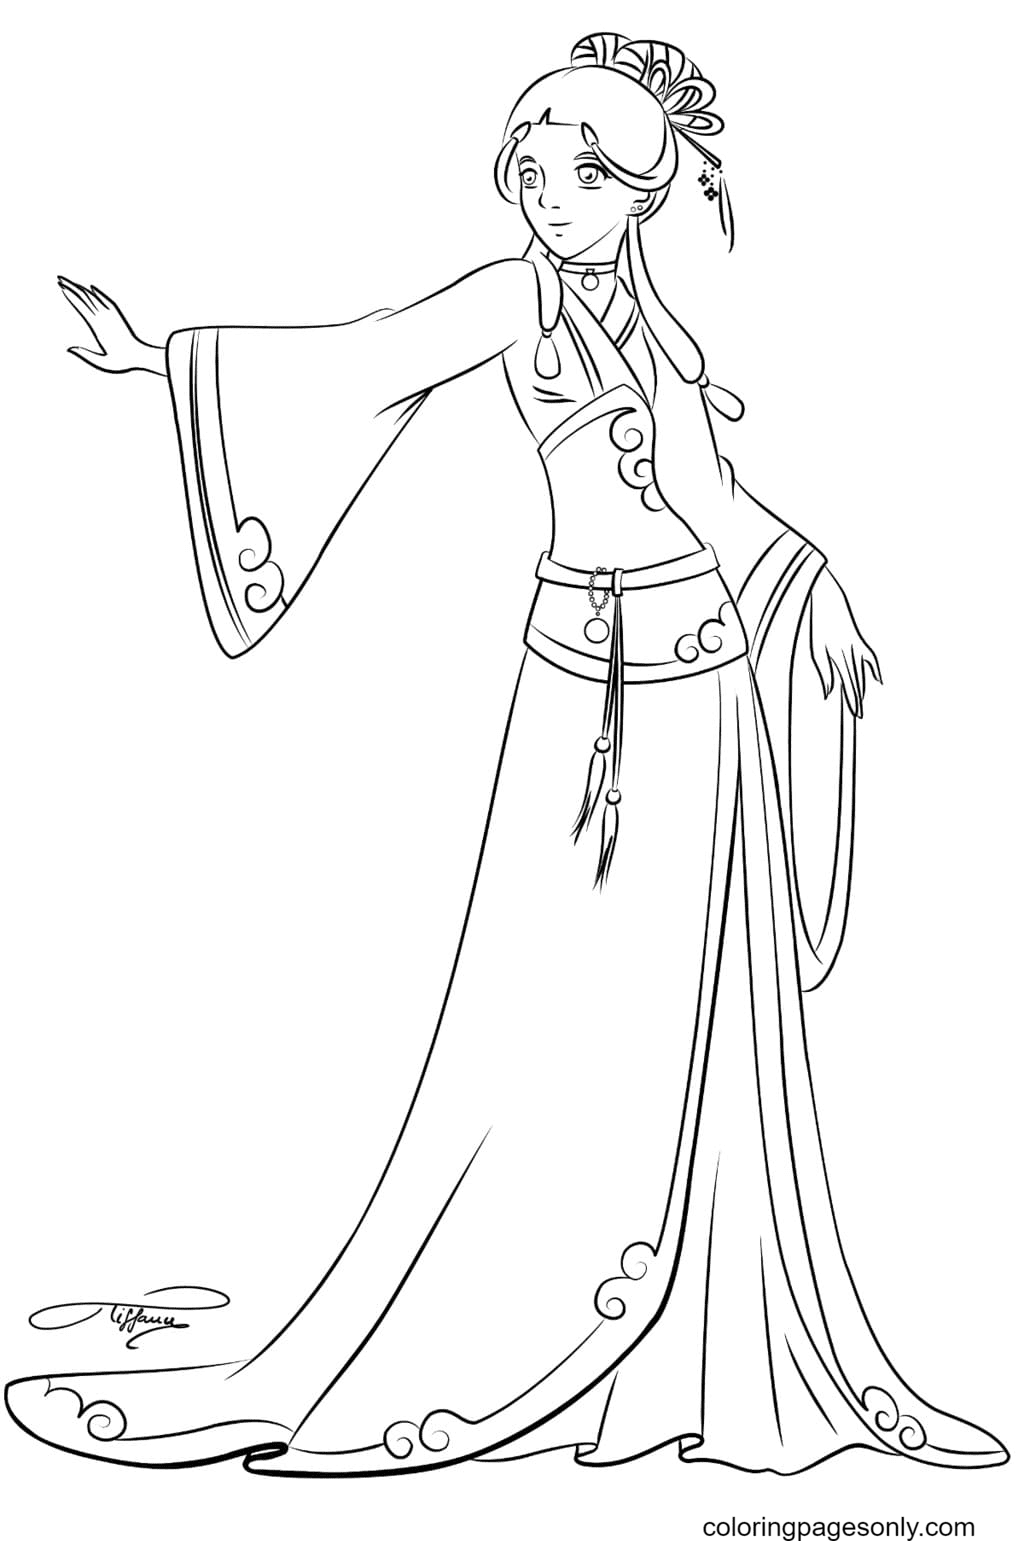 Katara from Avatar the Last Airbender Coloring Page